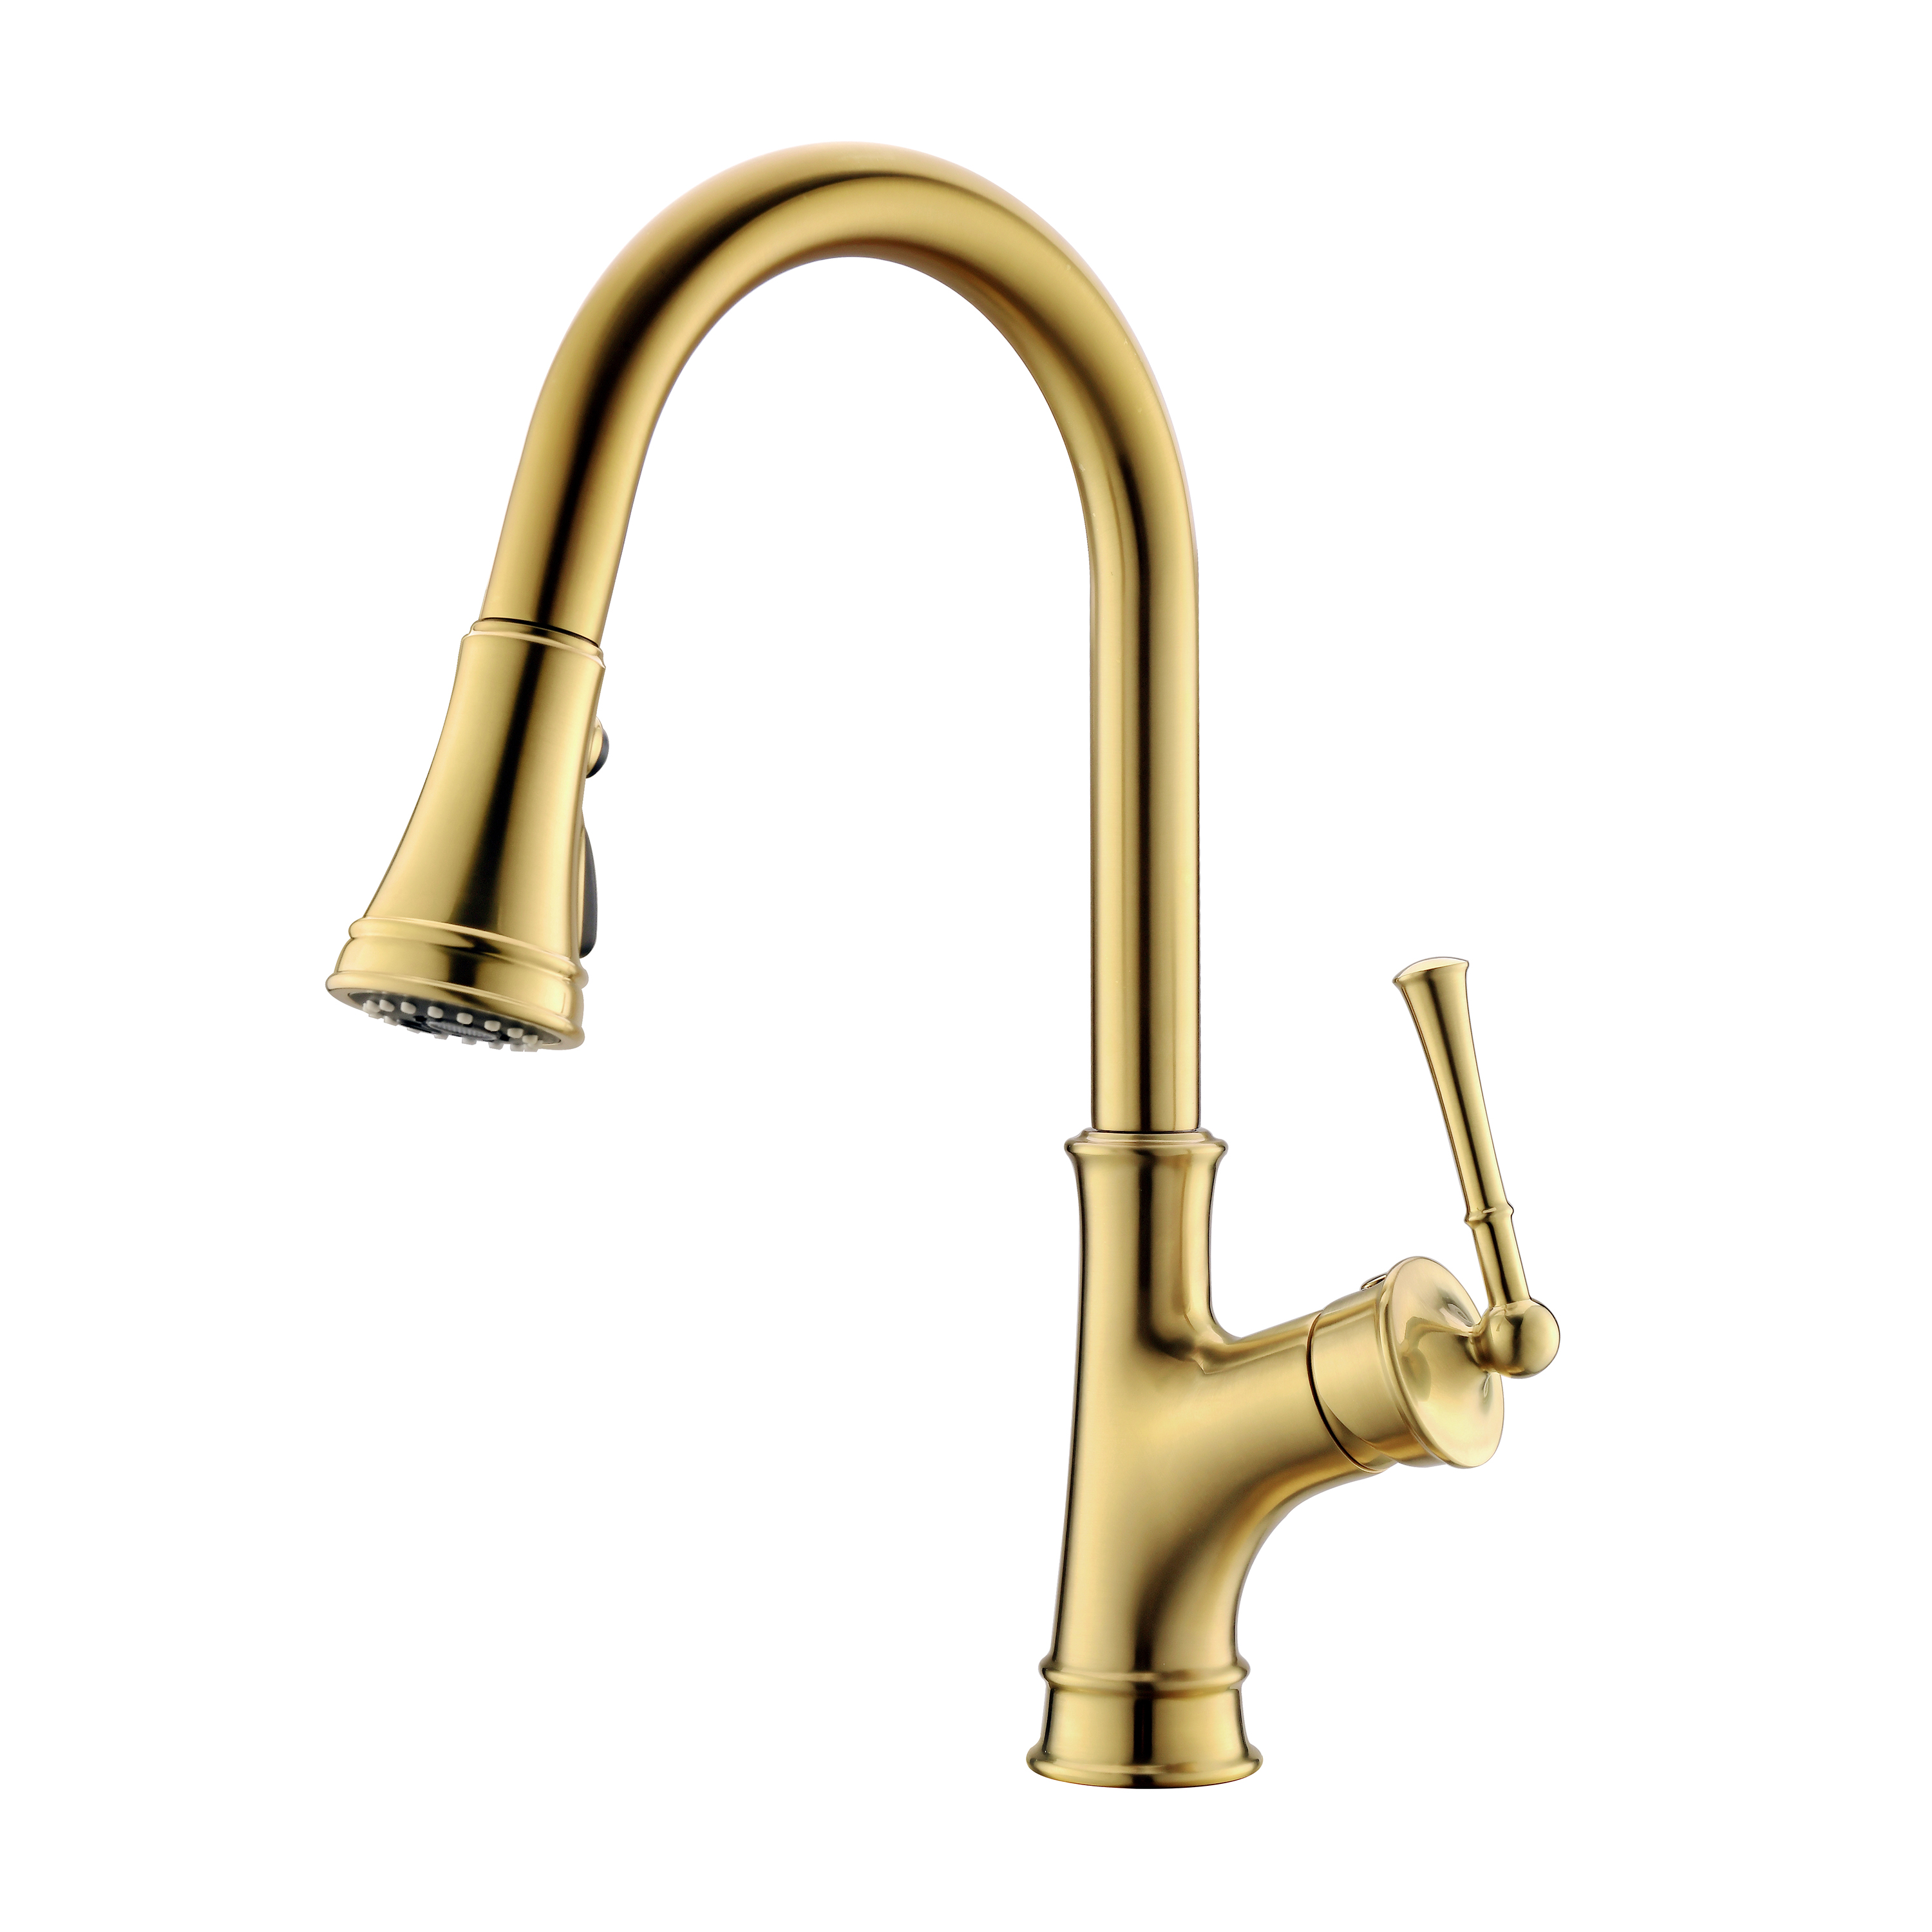 Brushed Gold Kitchen Faucet Pull -Down cUPC Kitchen Faucet 